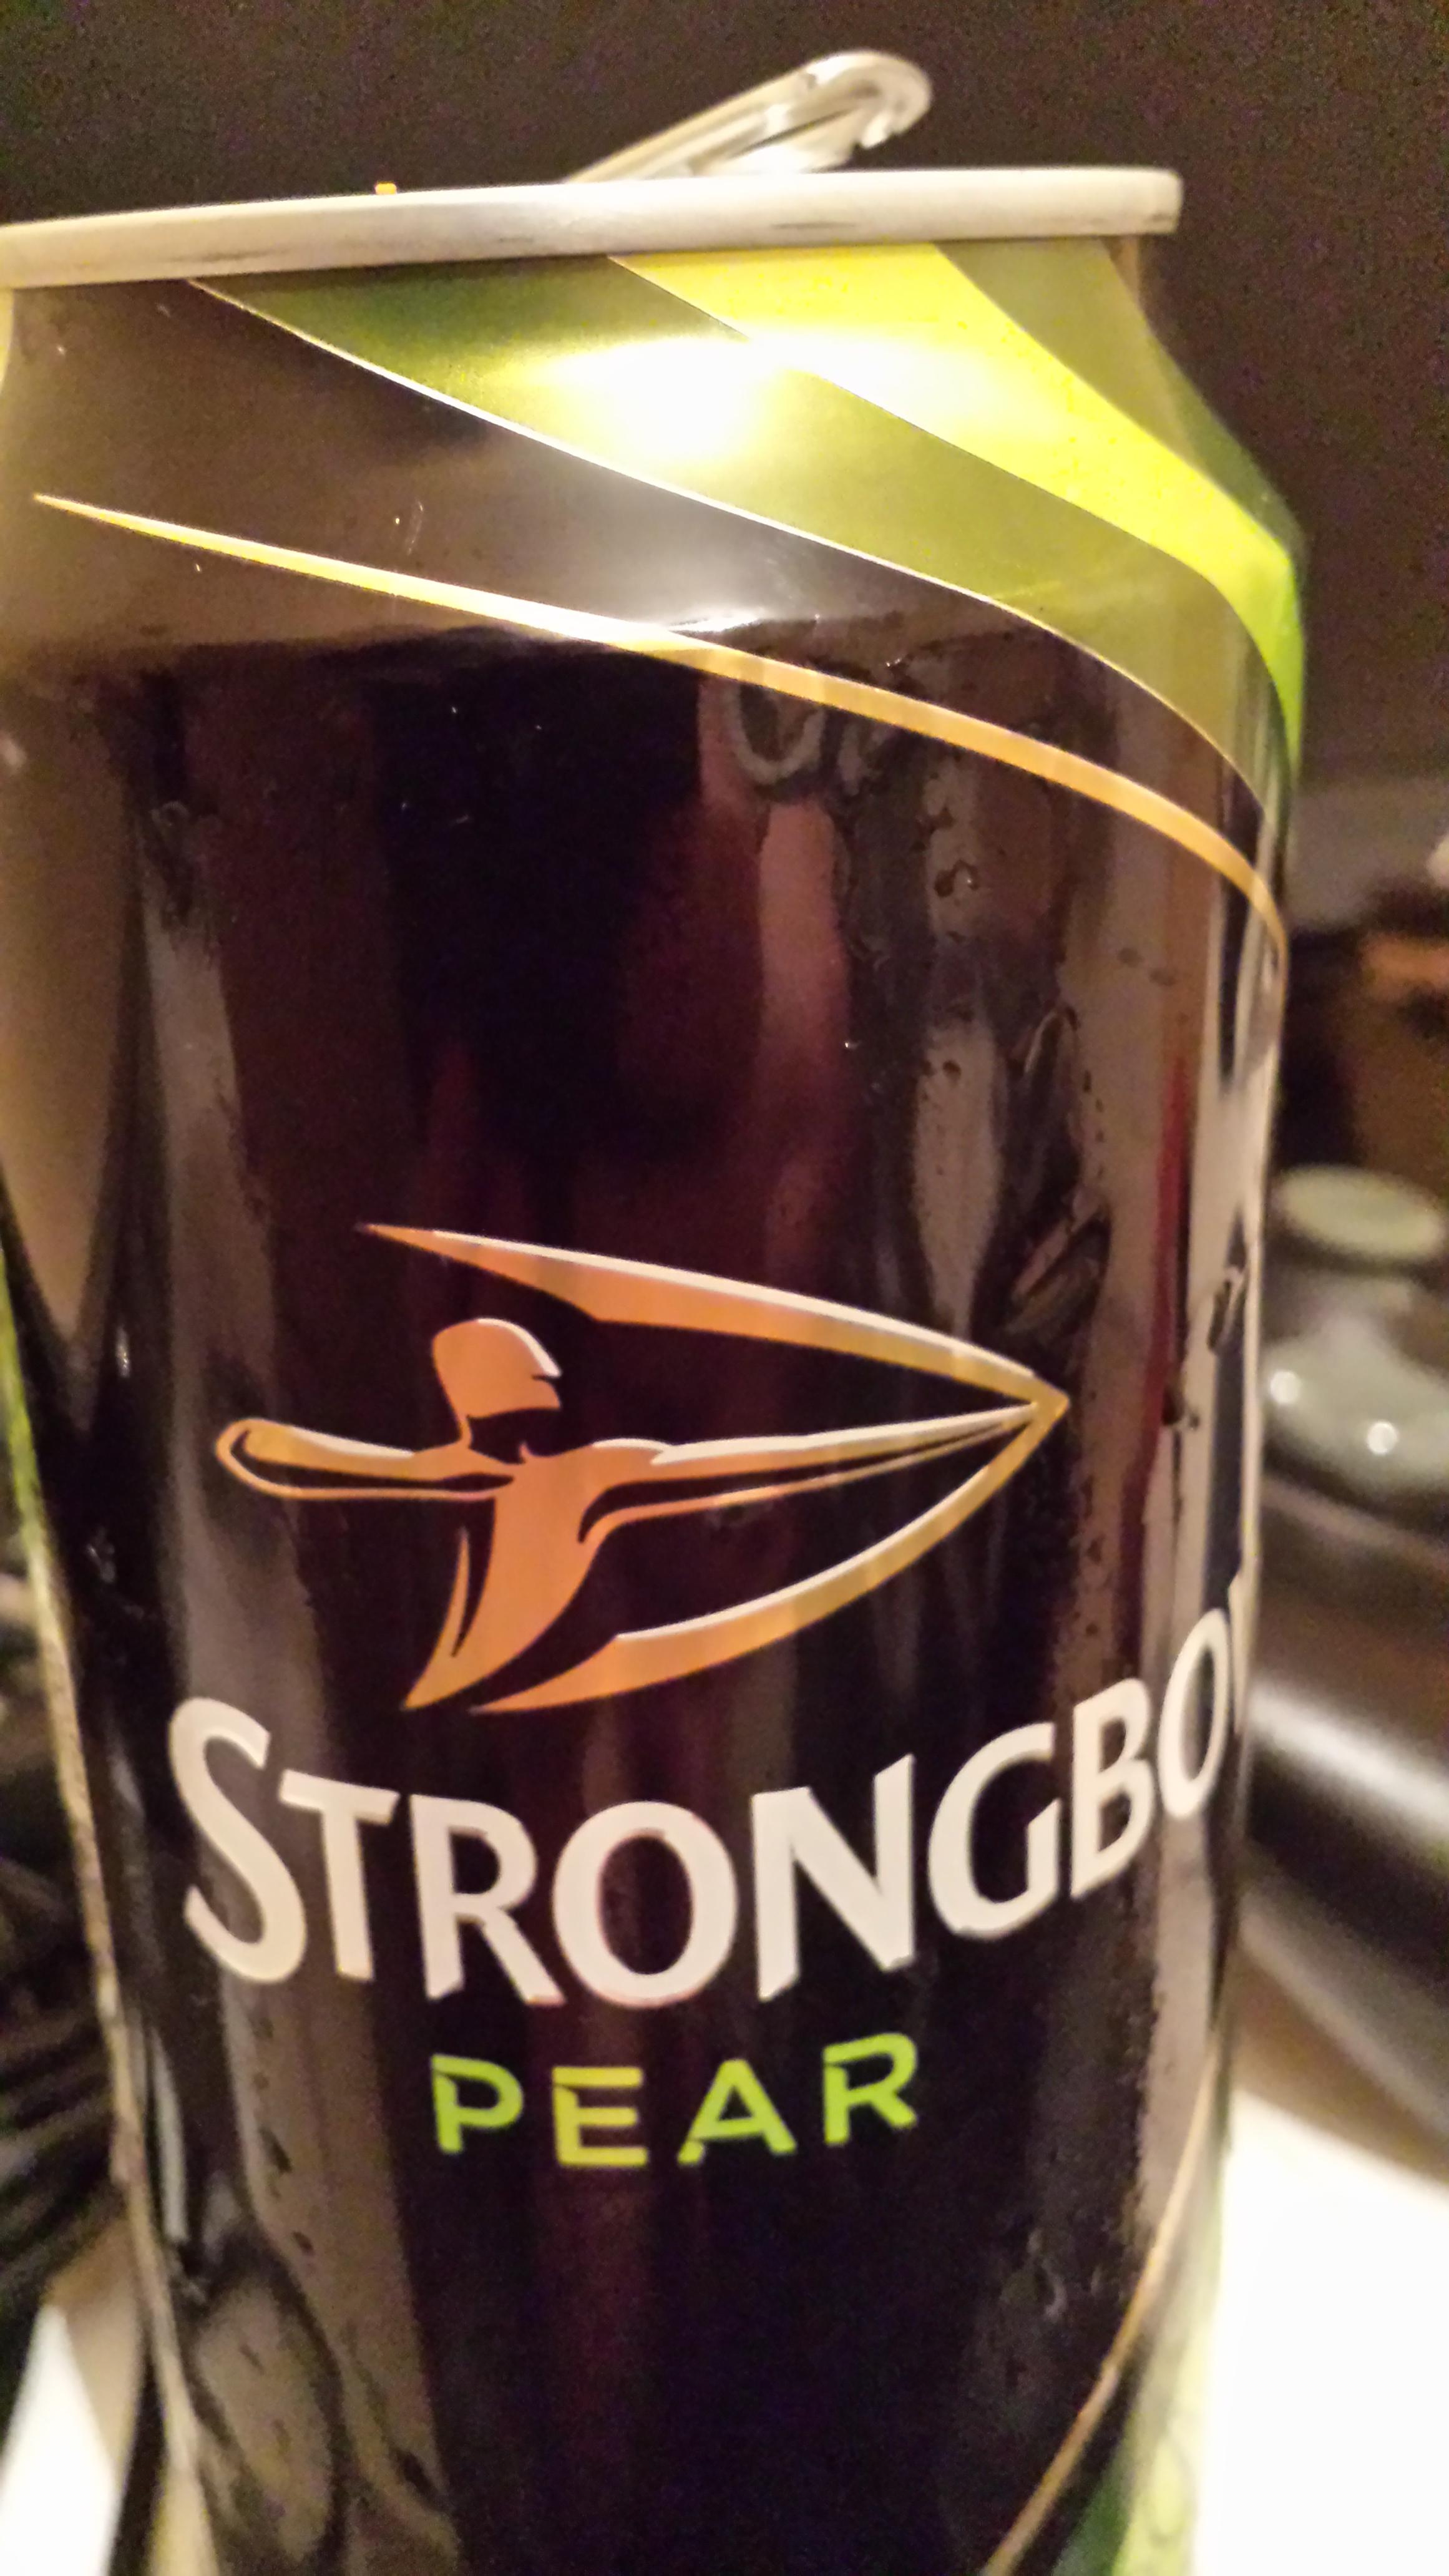 Strongbow Logo - This Strongbow logo is both an archer with a bow and an arrowhead ...